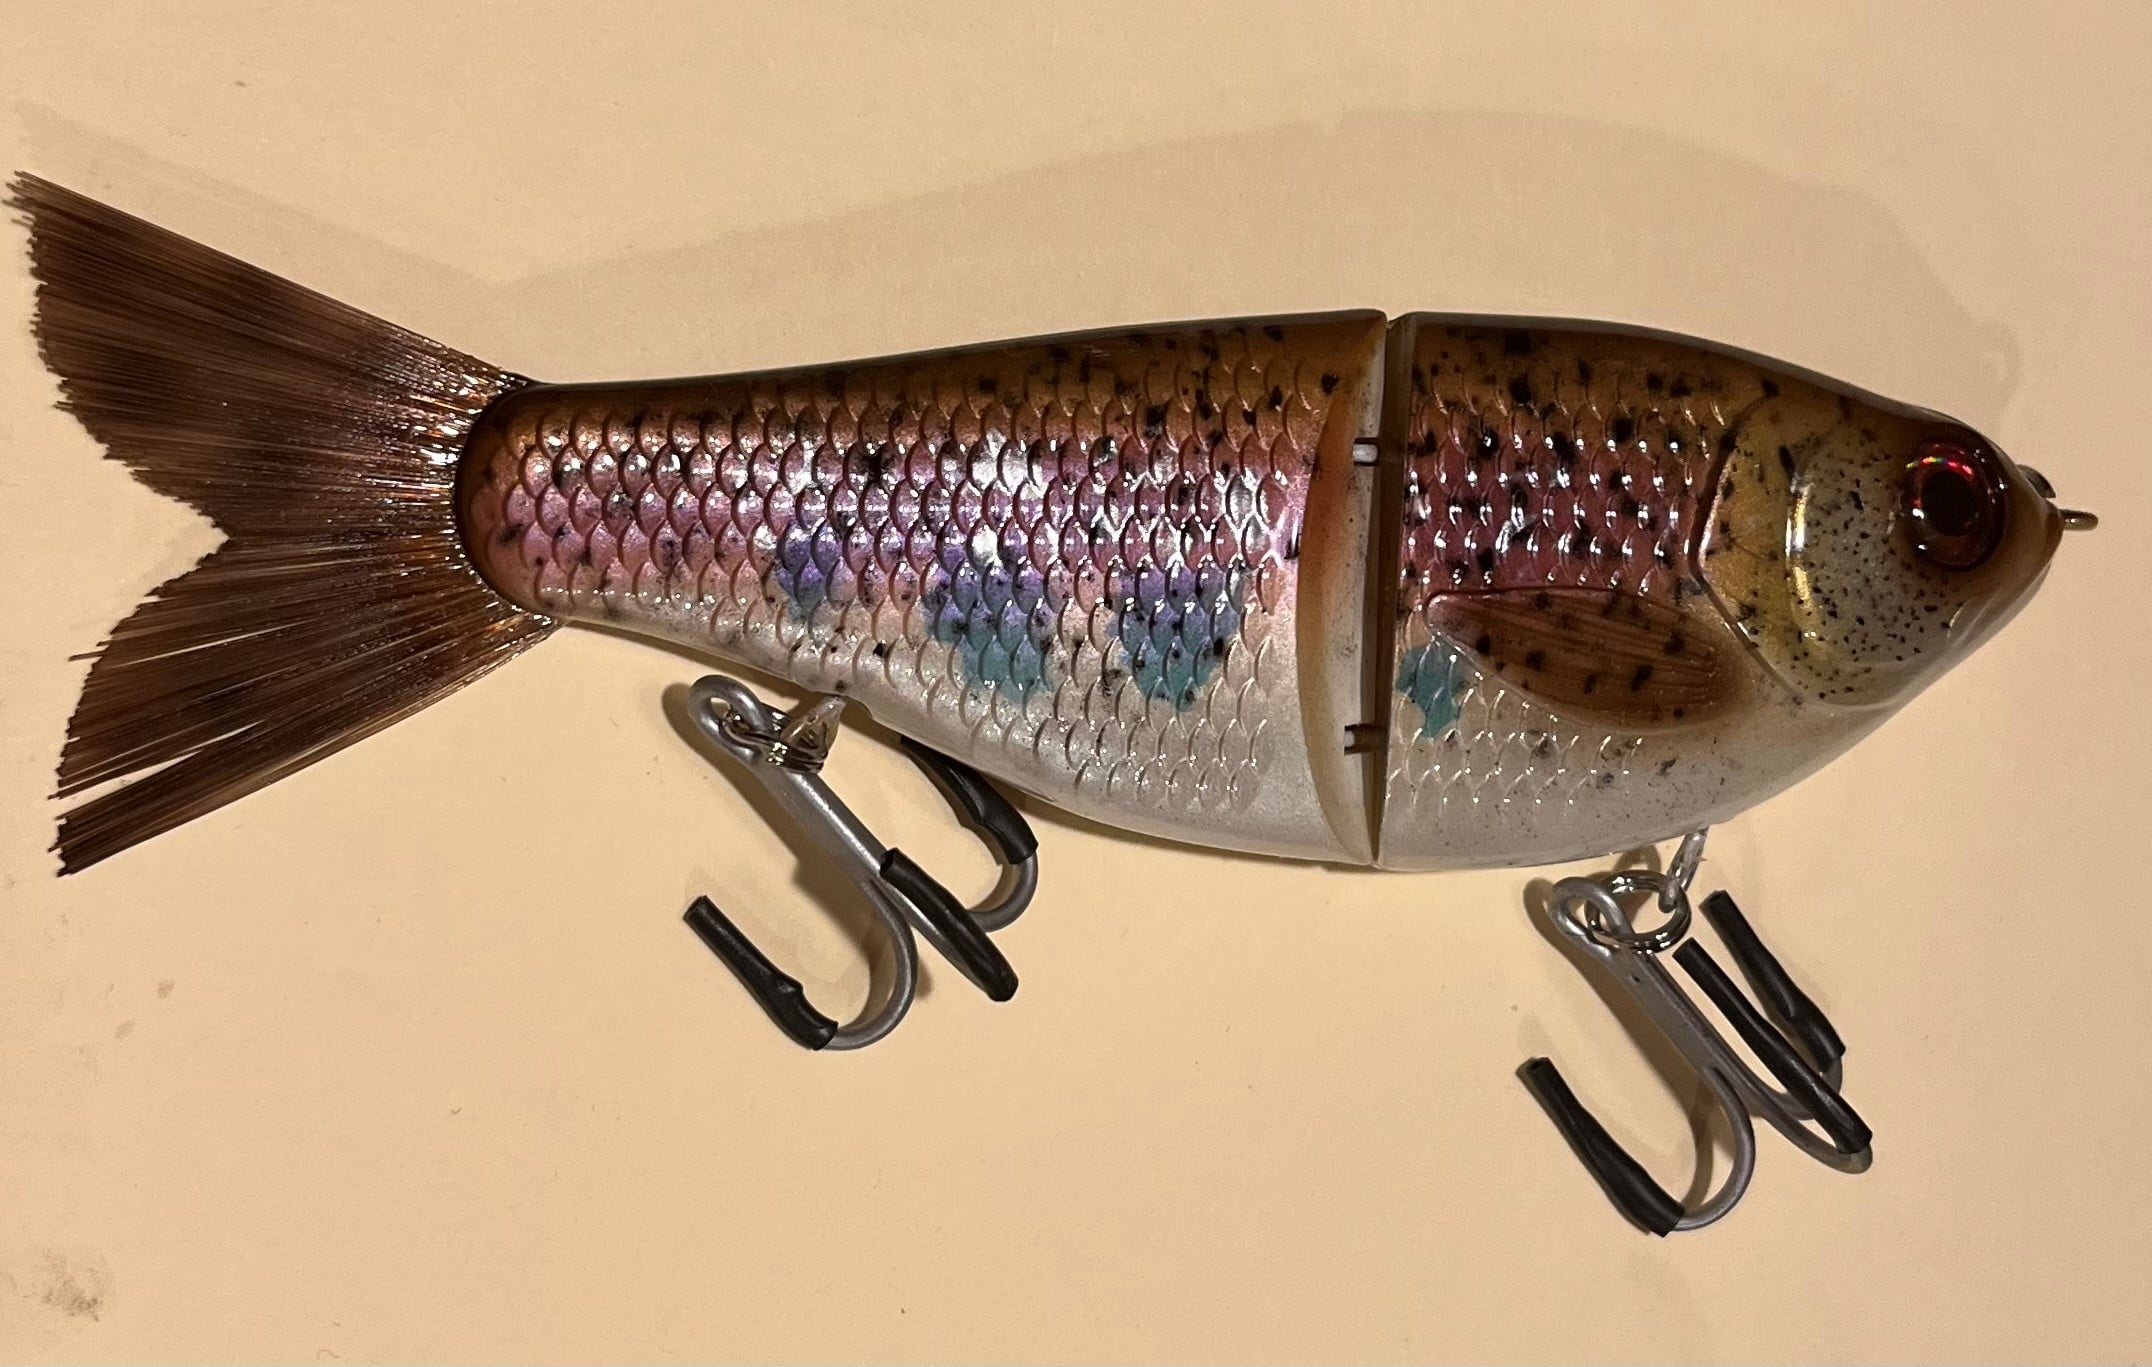 STRIPER MAGIC RIVER “BABY TROUT” – HAND CRAFTED GLIDE BAIT STRIPER LURES!